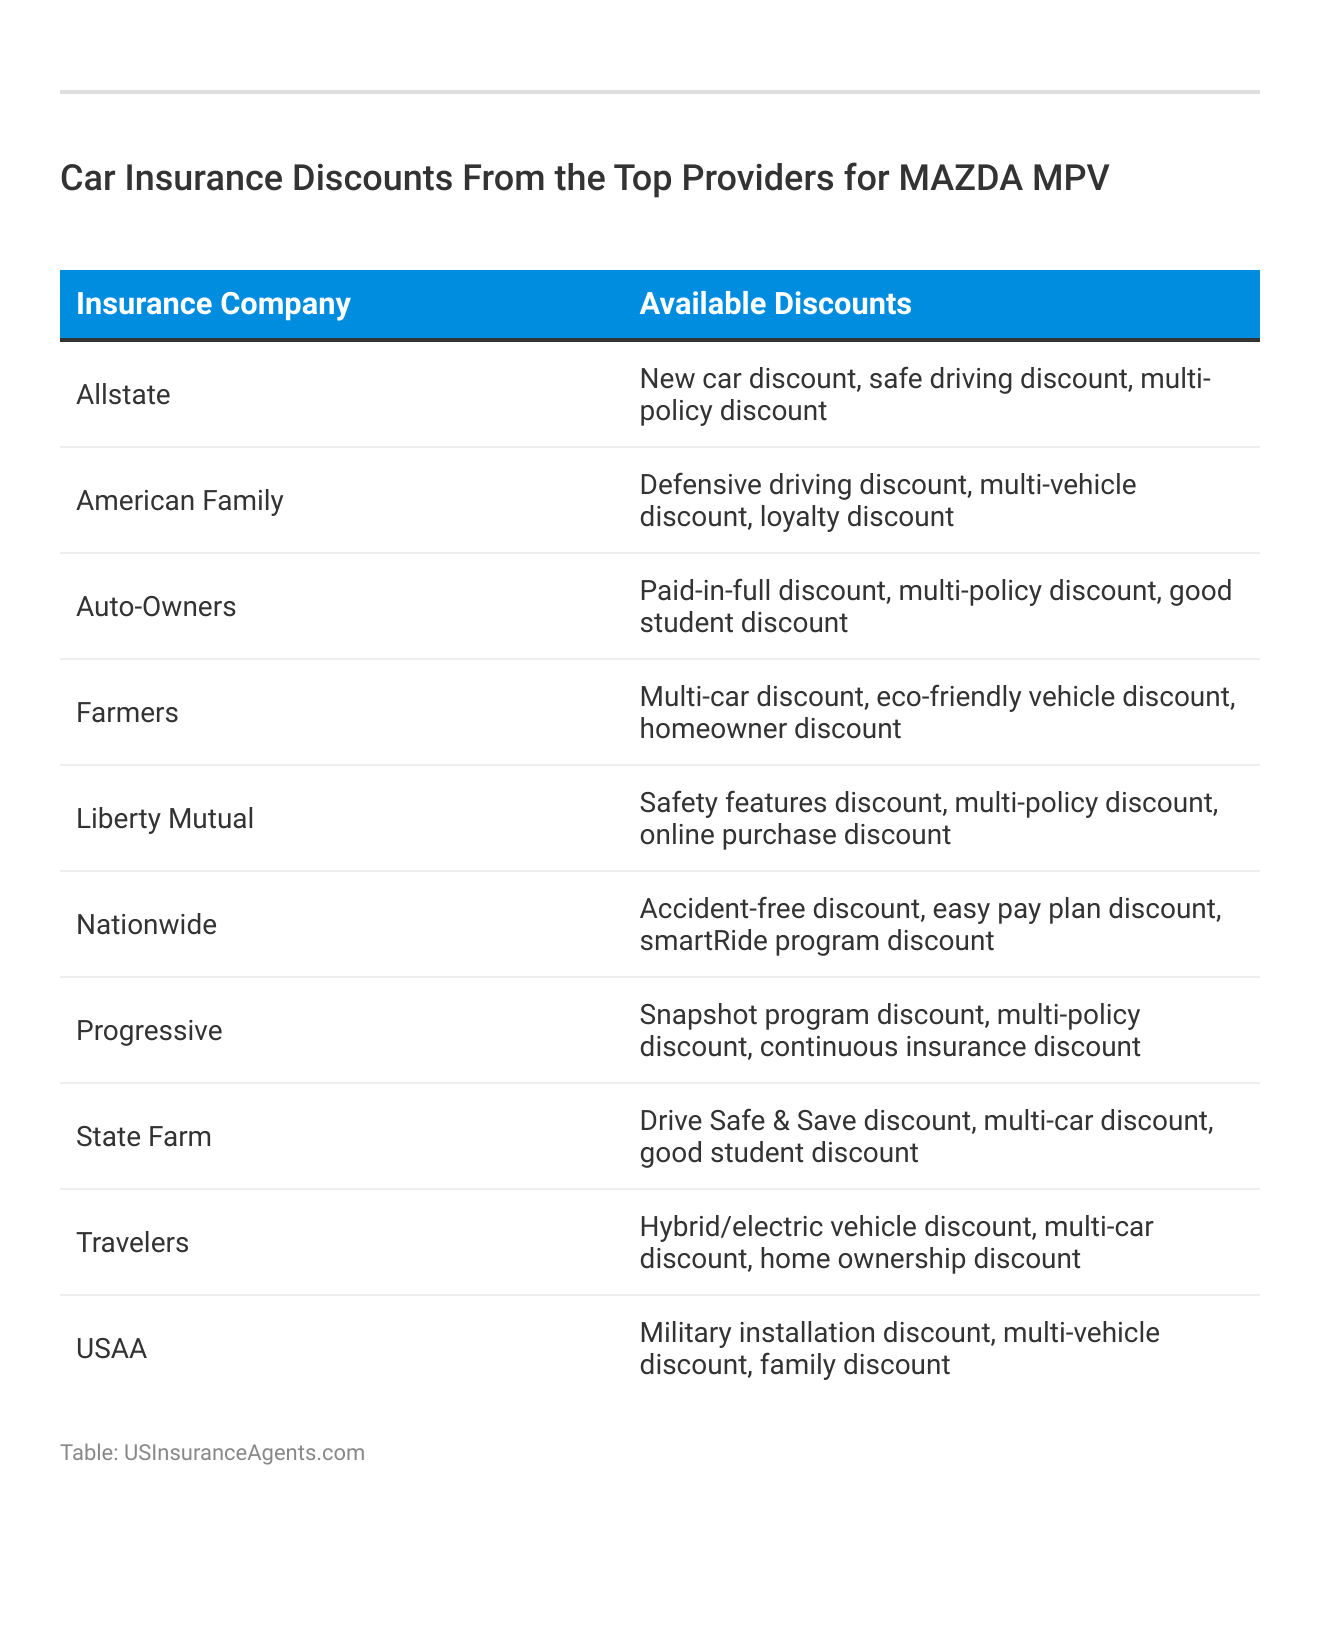 <h3>Car Insurance Discounts From the Top Providers for Mazda MPV</h3>